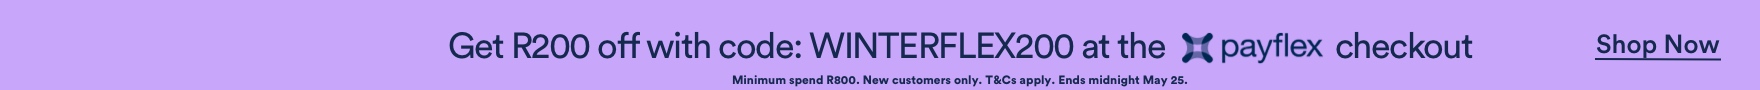 Get R200 off with code: WINTERFLEX200 at the payflex checkout. T&Cs Apply. Click to Shop Now.